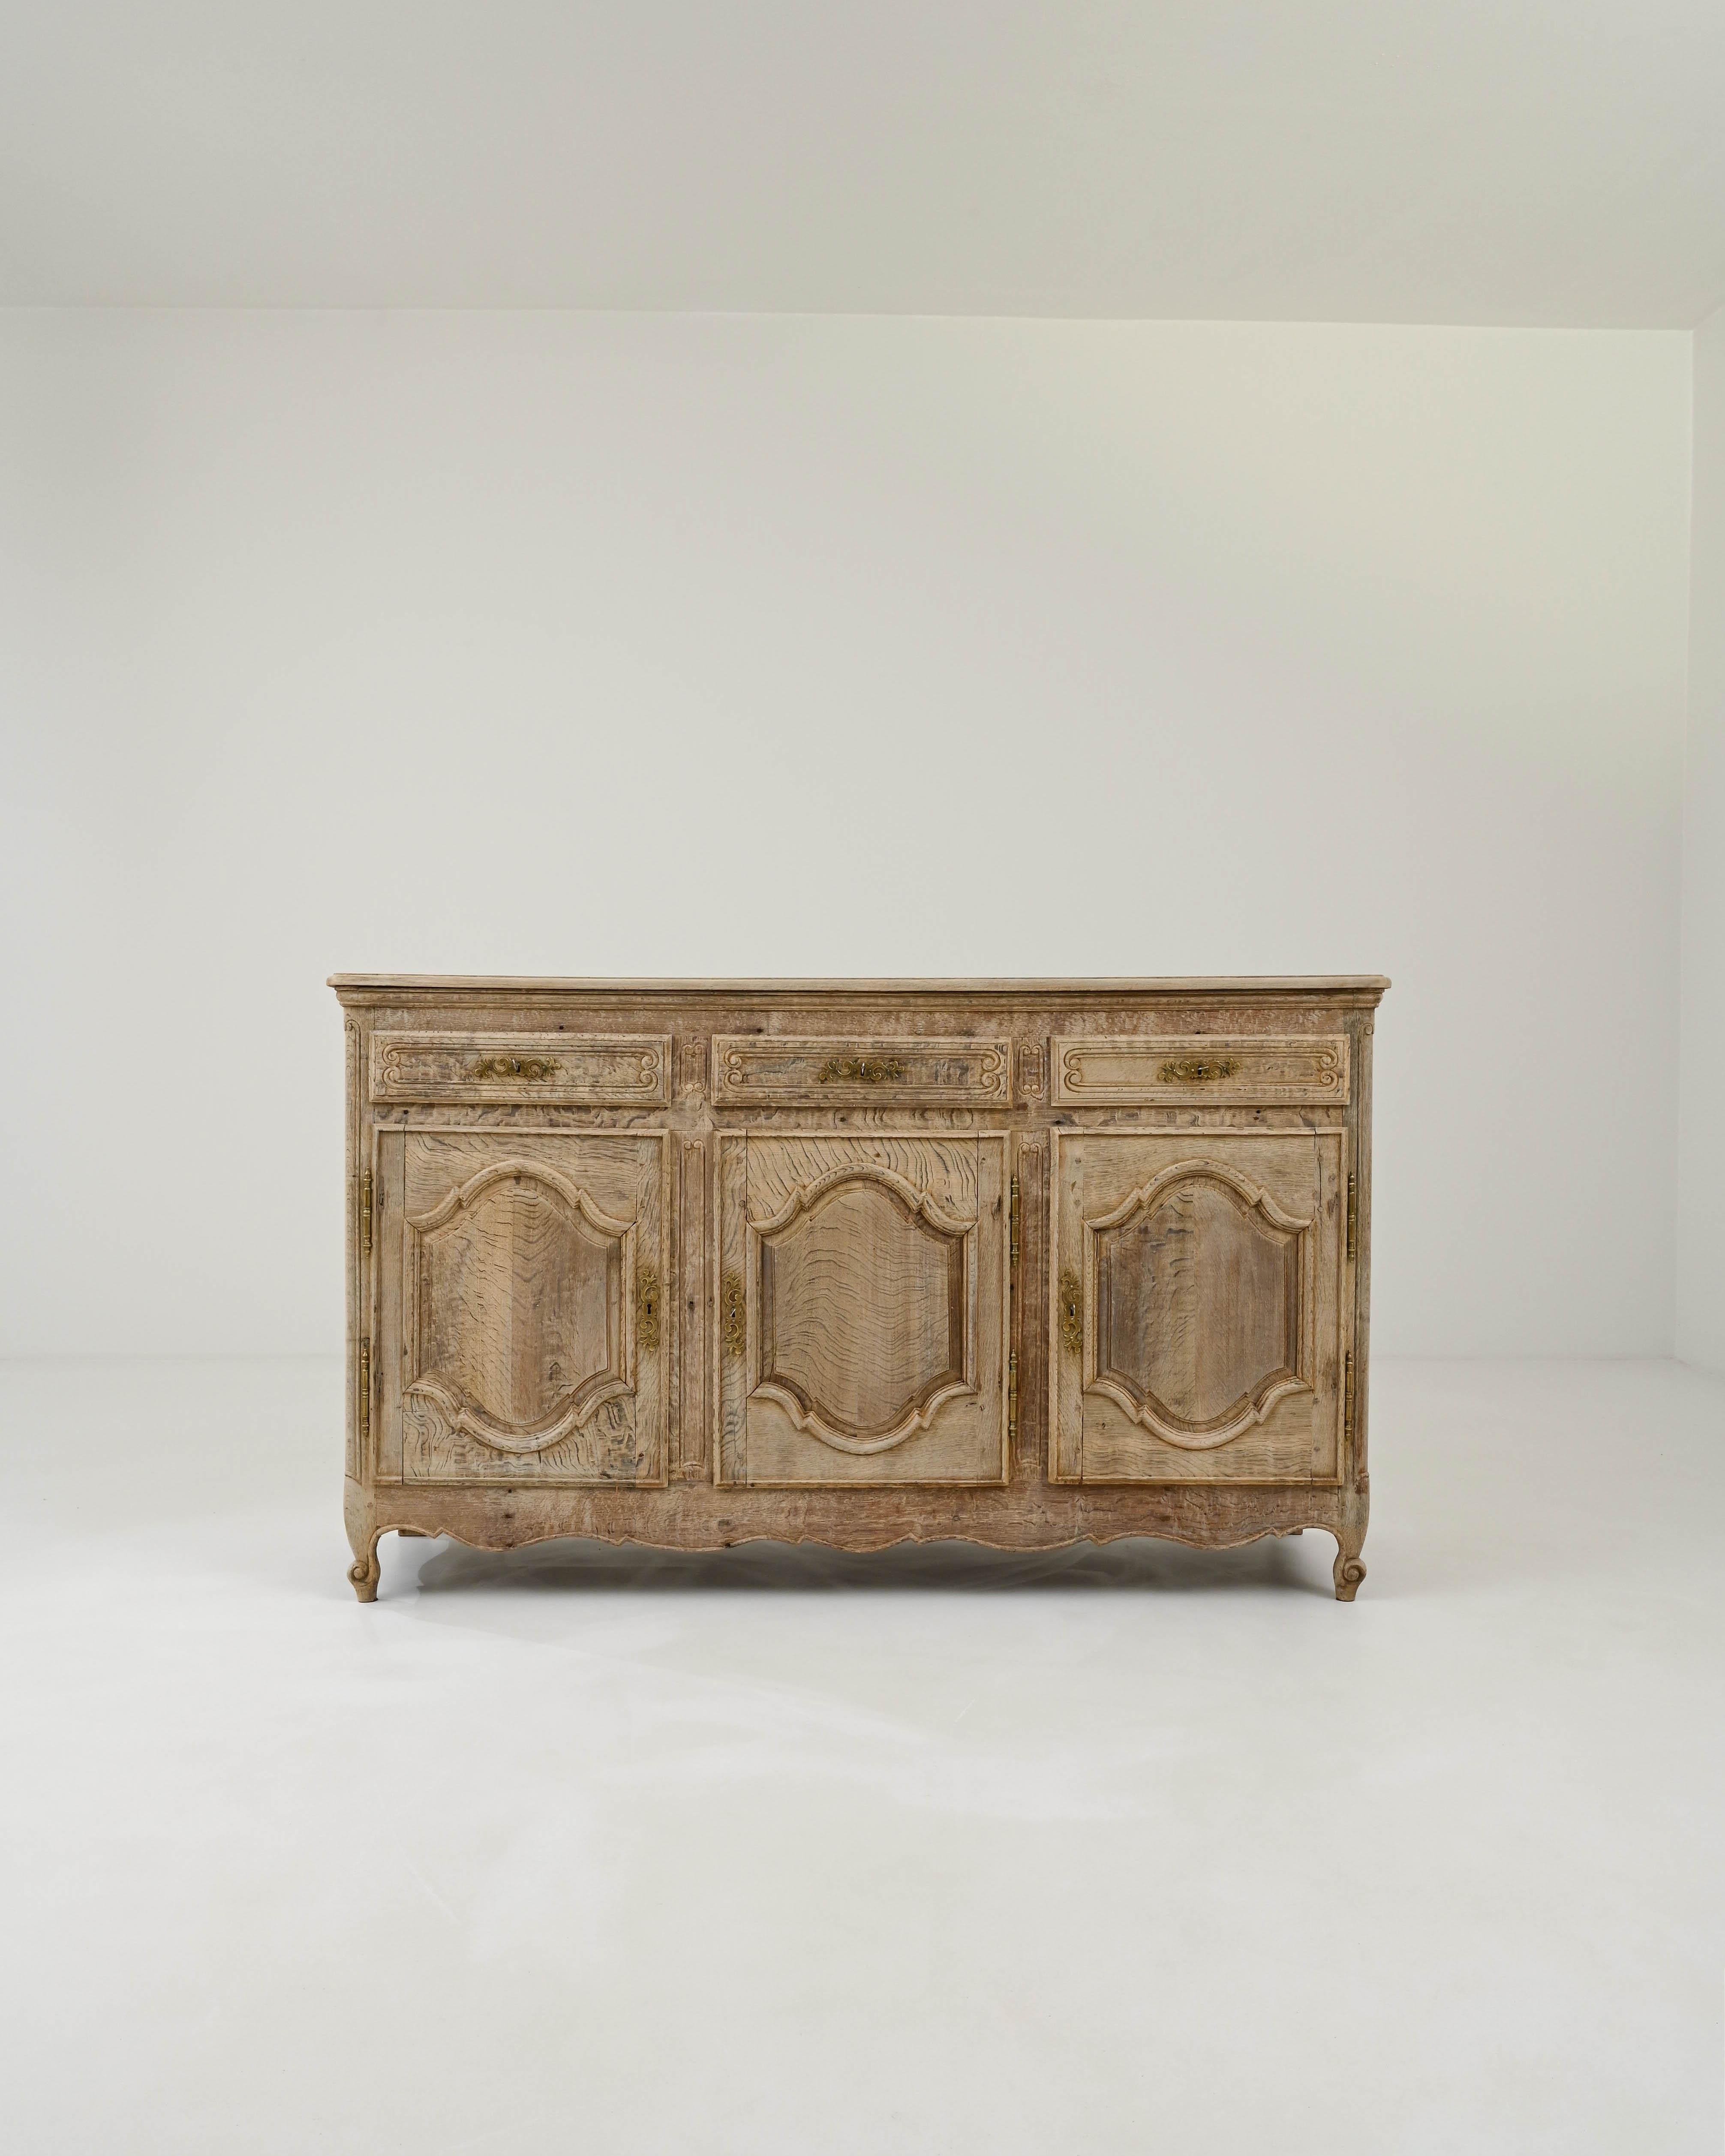 With its charming provincial design and warm natural finish, this antique oak buffet is a covetable find. Hand-crafted in France in the 1800, the doors of the three spacious cupboards are decorated with elegant carved paneling; tightly coiled